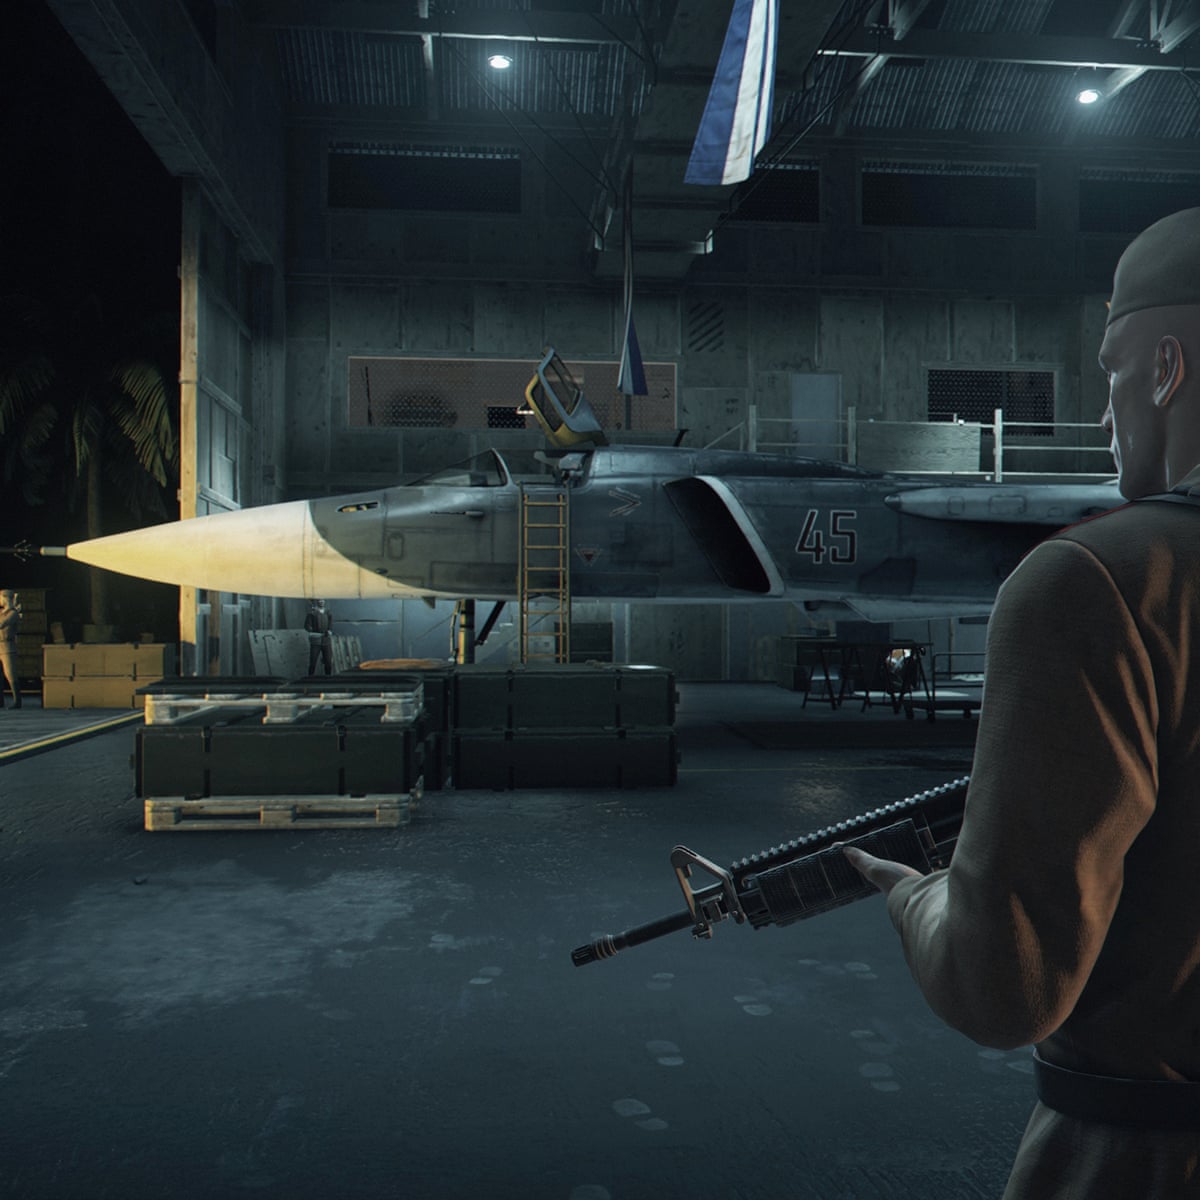 Middellandse Zee Voorzitter Systematisch Hitman review – clever, immersive and experimental | Games | The Guardian